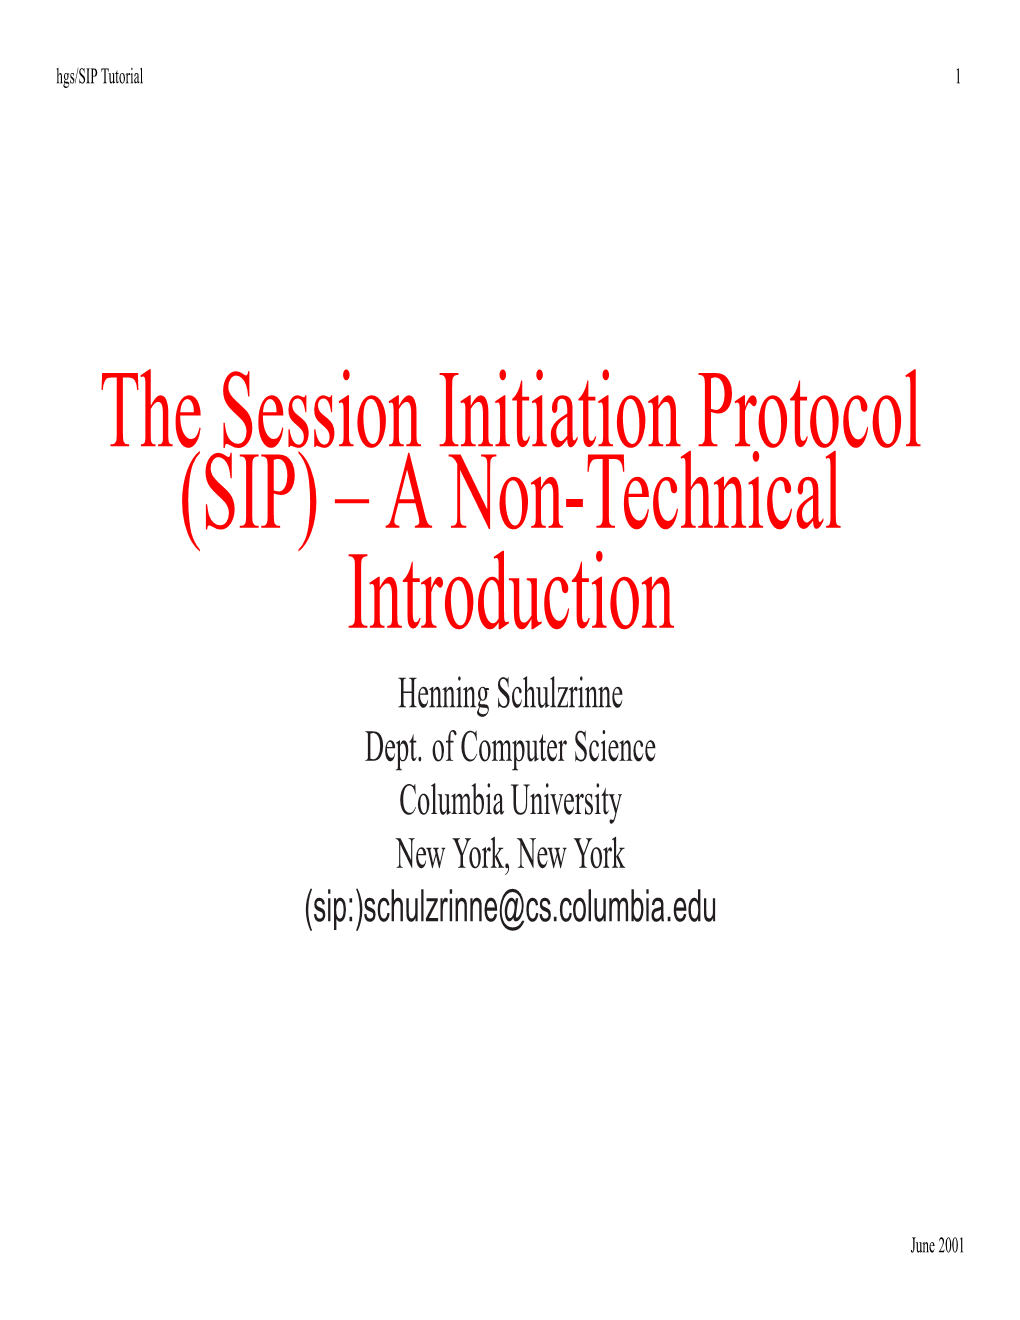 The Session Initiation Protocol (SIP) – a Non-Technical Introduction Henning Schulzrinne Dept